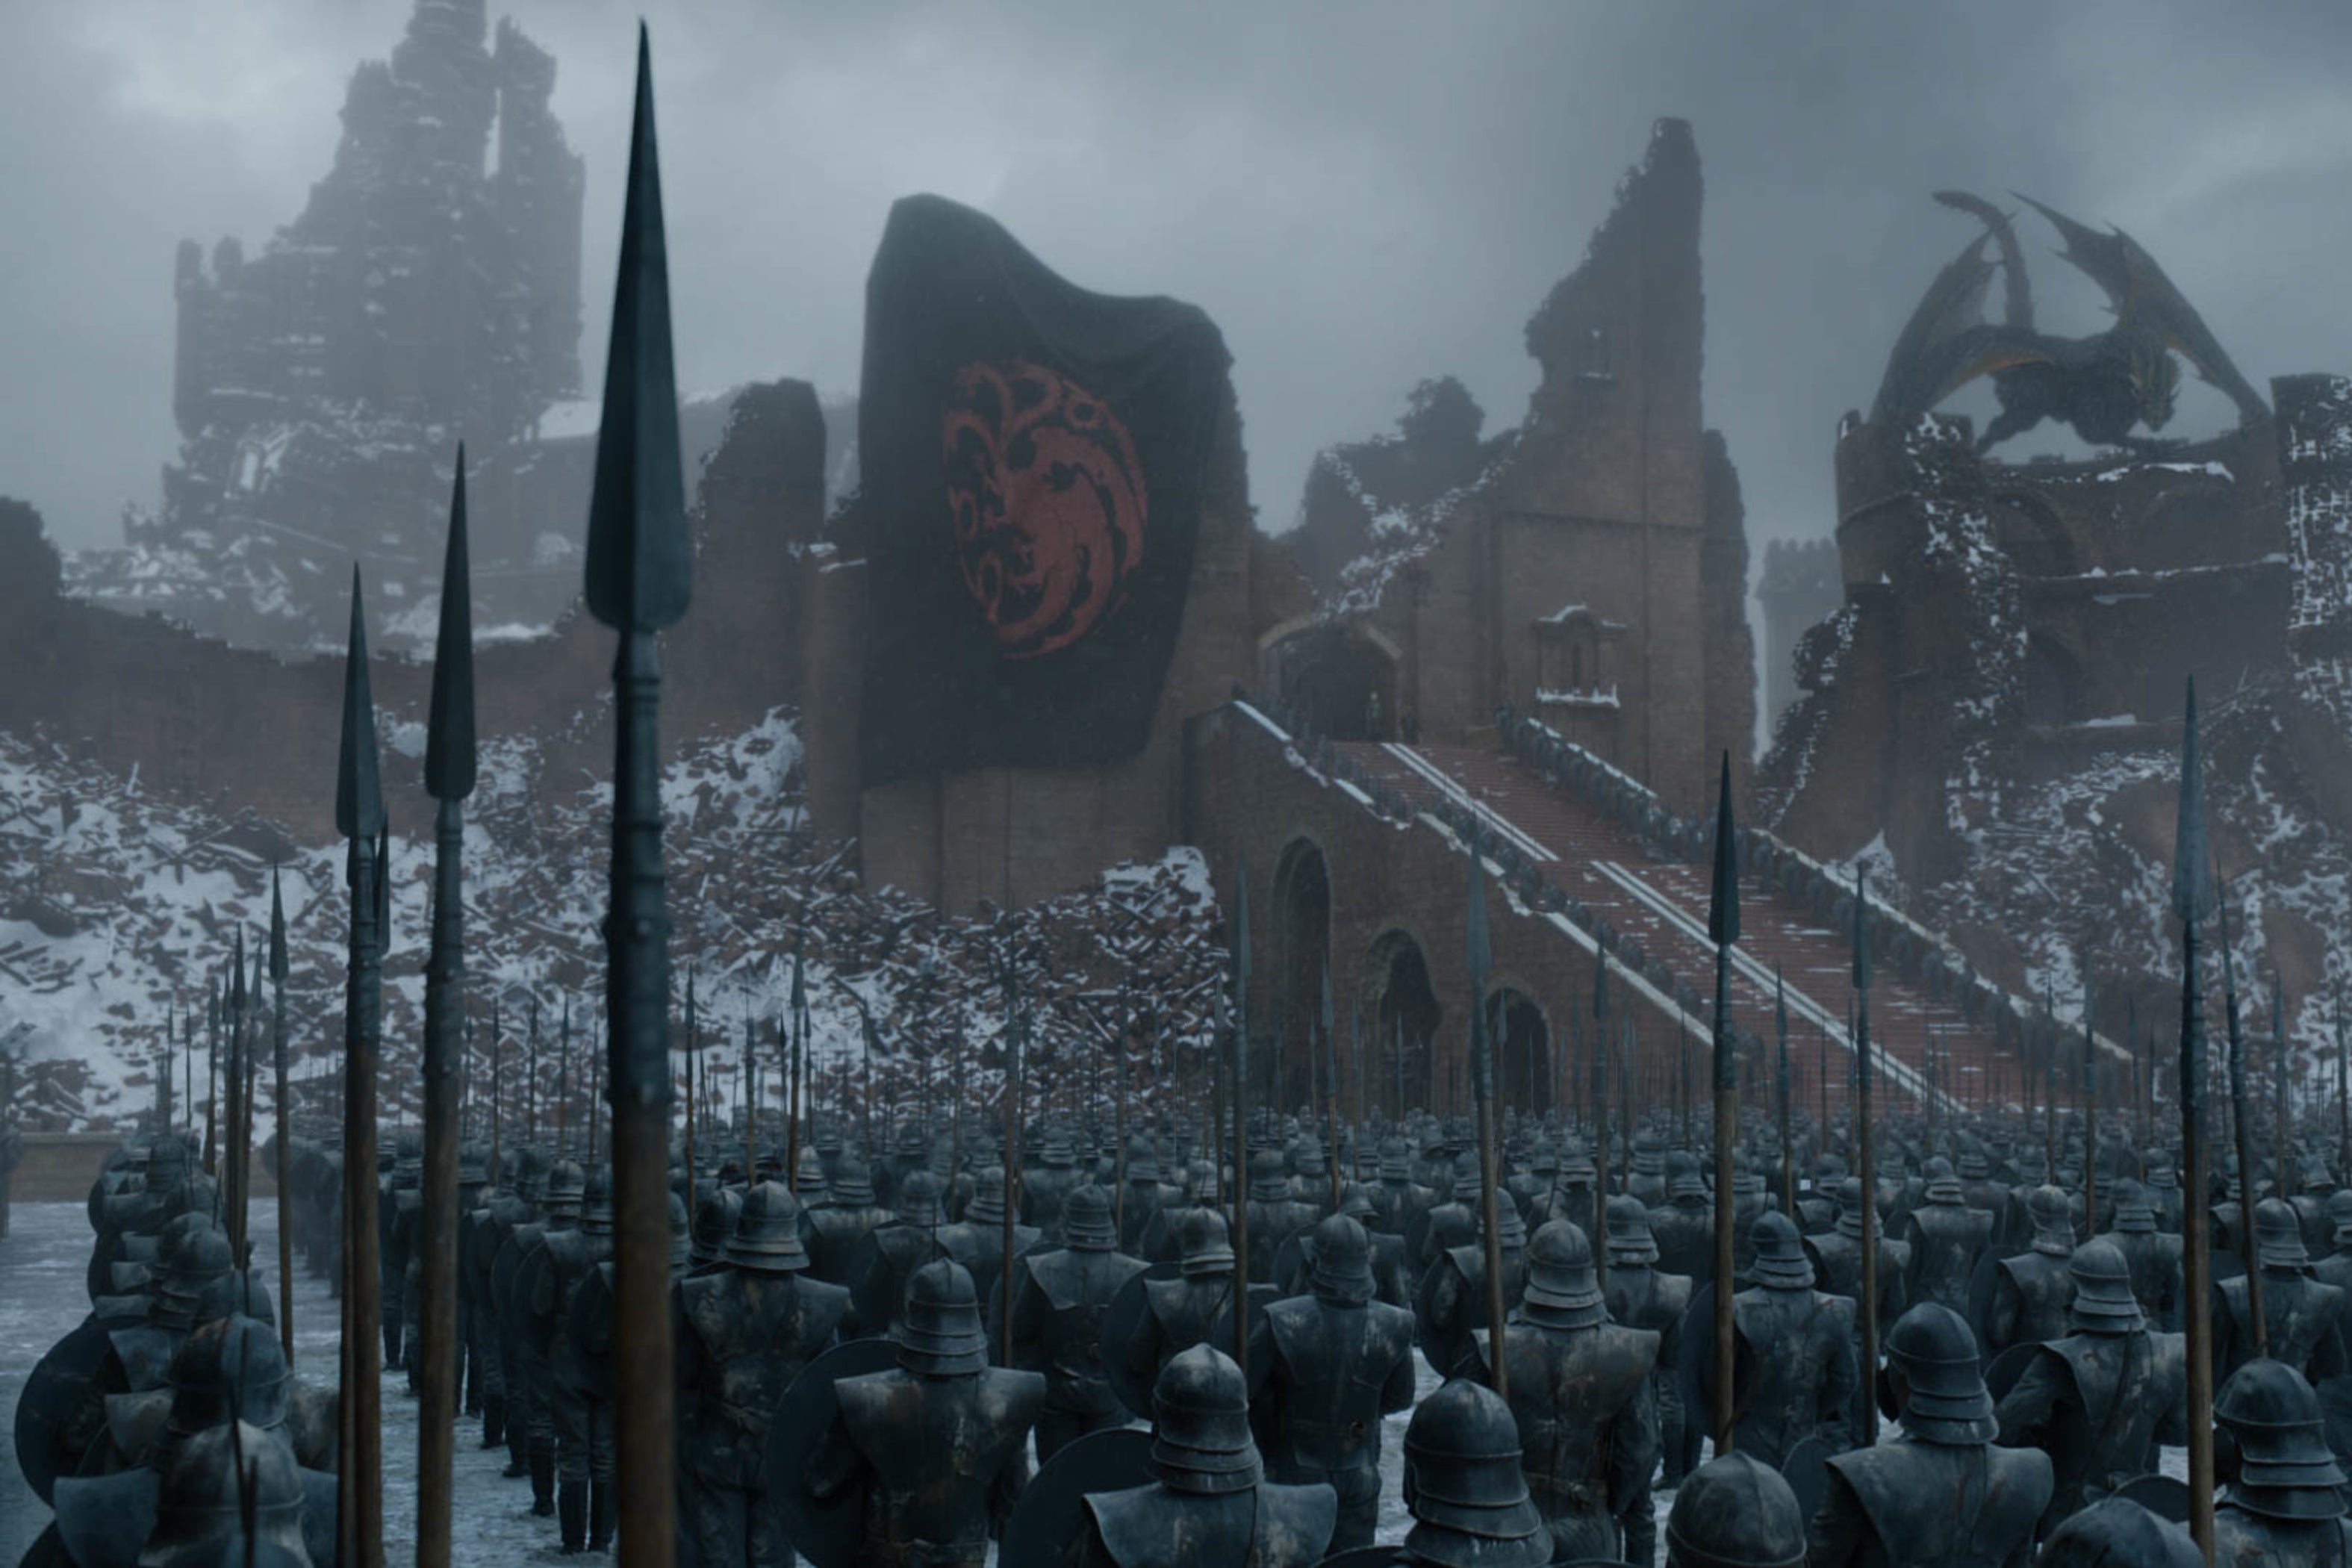 Daenerys greats her armies as her dragon looks on, in a sequence straight out of Triumph of the Will